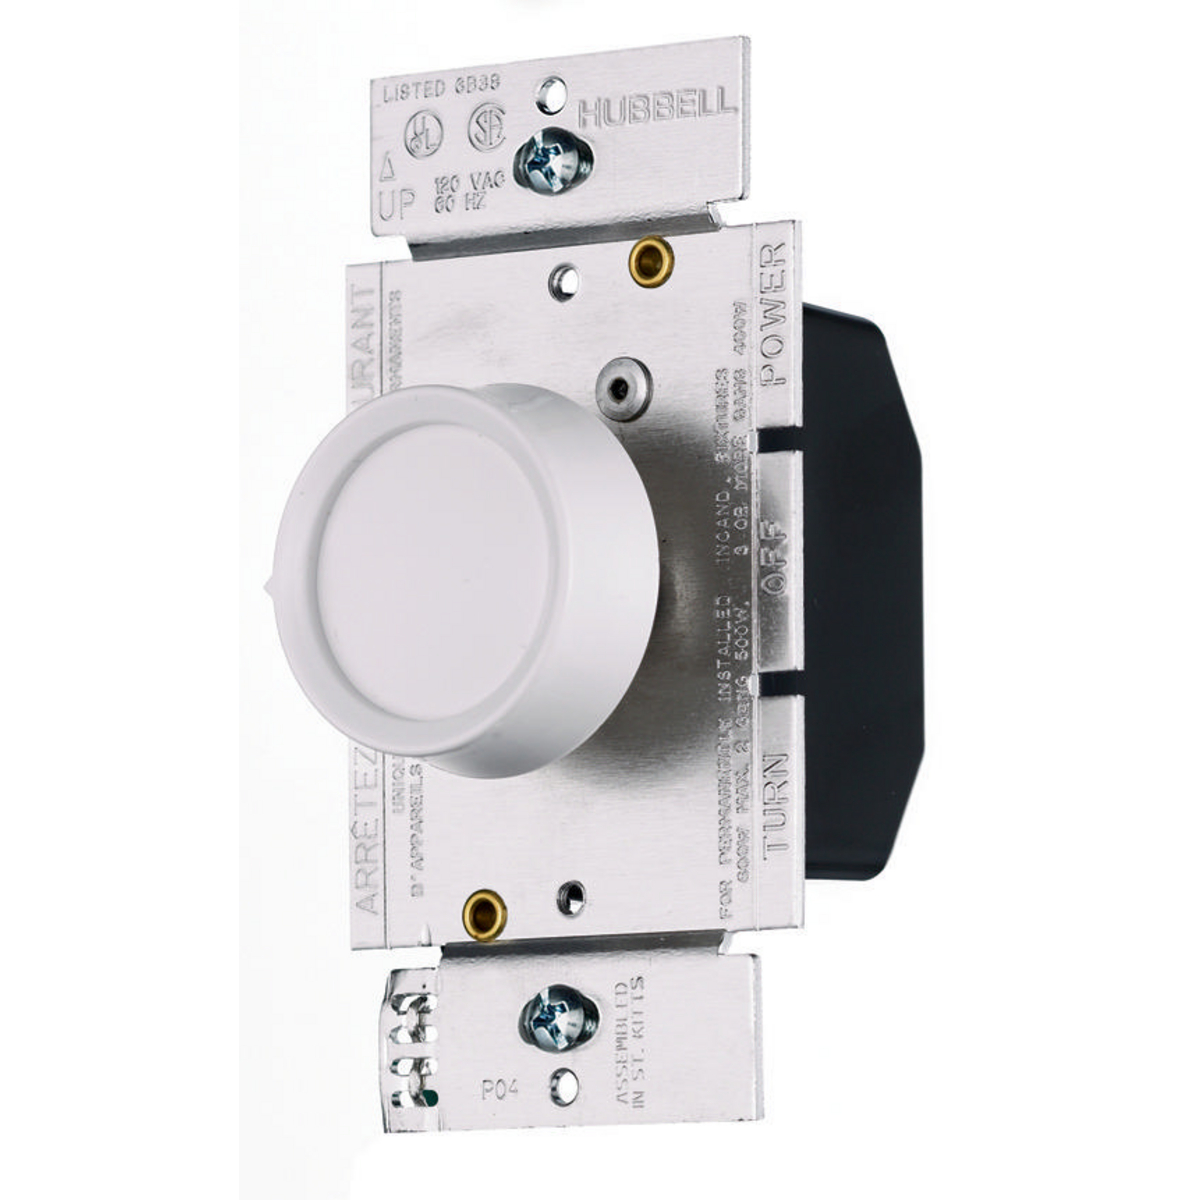 DIMMER, ROTARY, 3WAY, 600W 120V, WH/IV